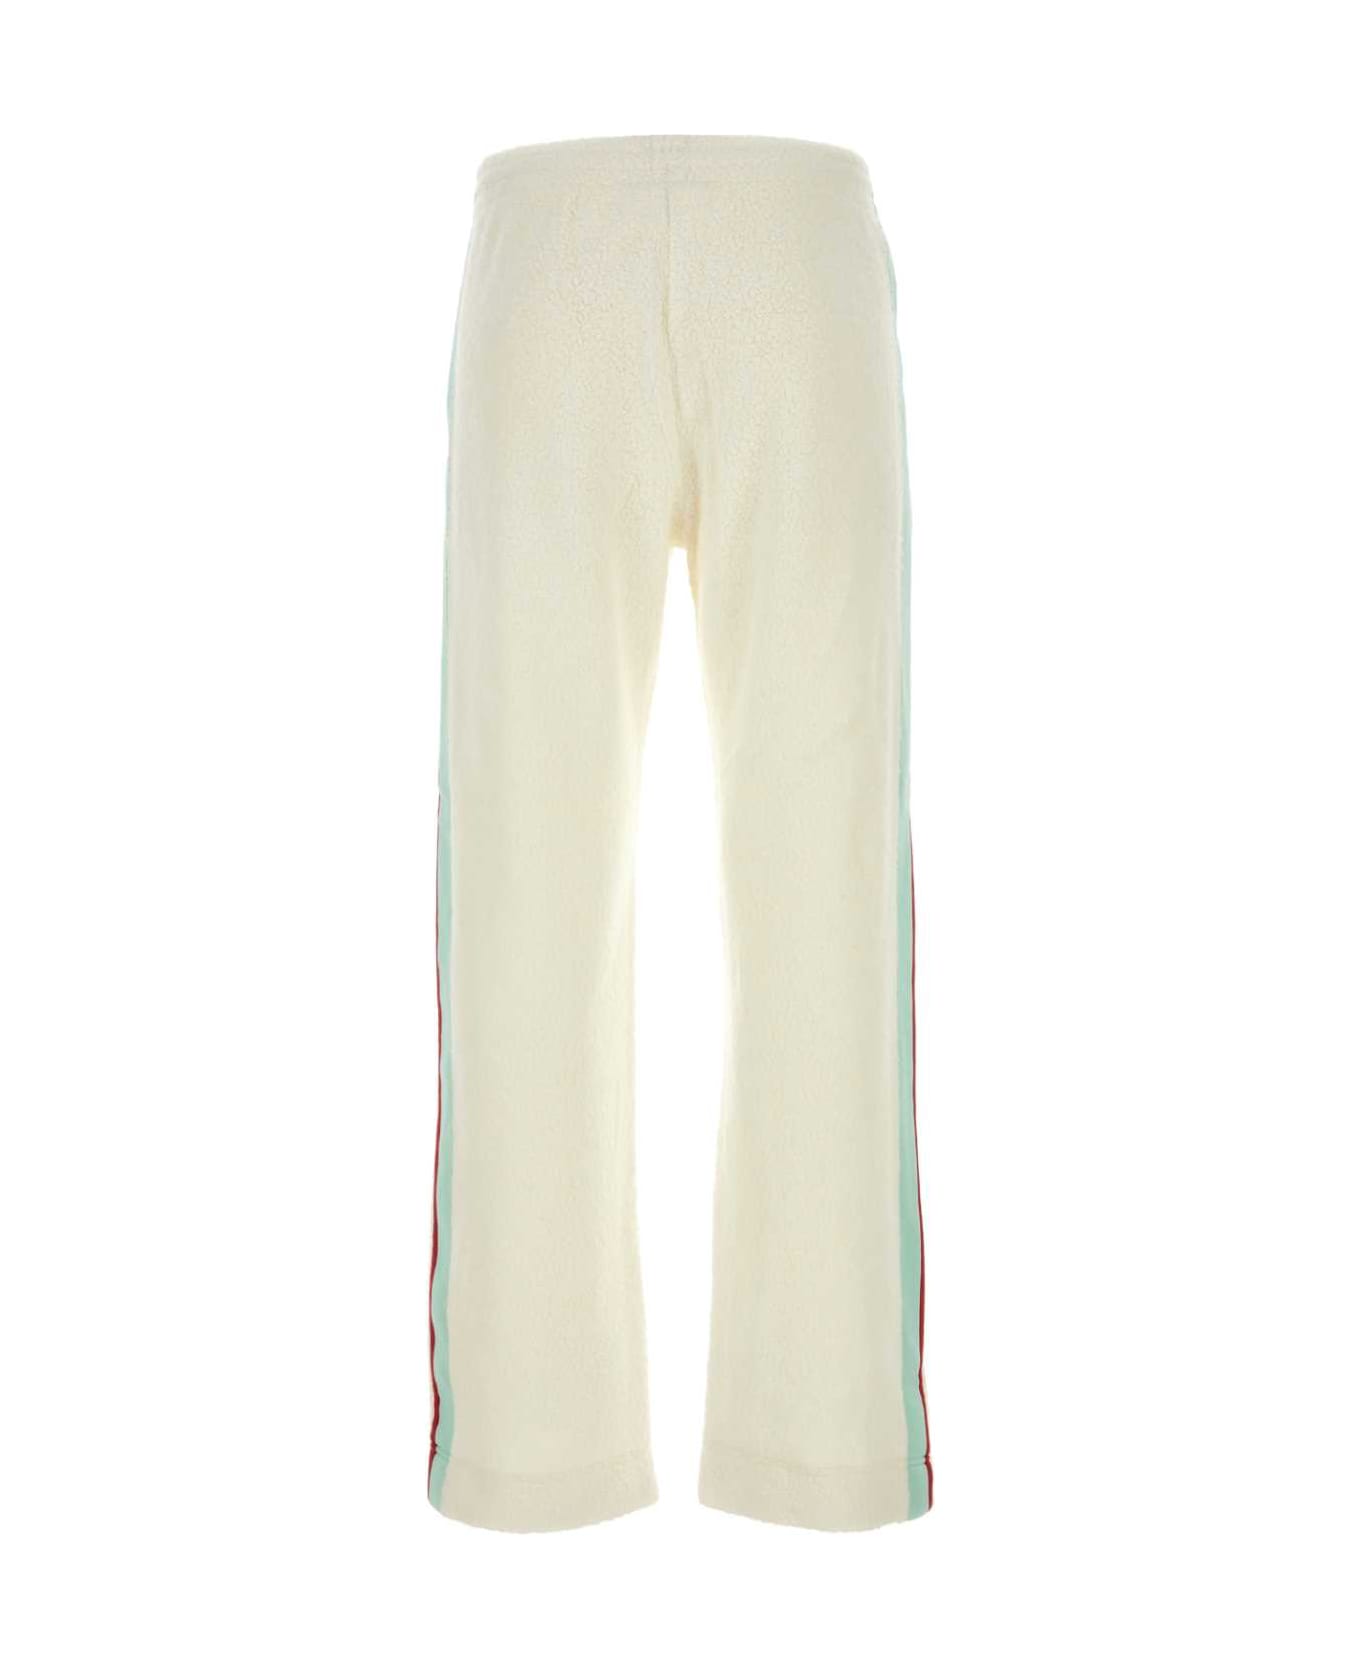 Casablanca Ivory Terry Joggers - OFFWHITE